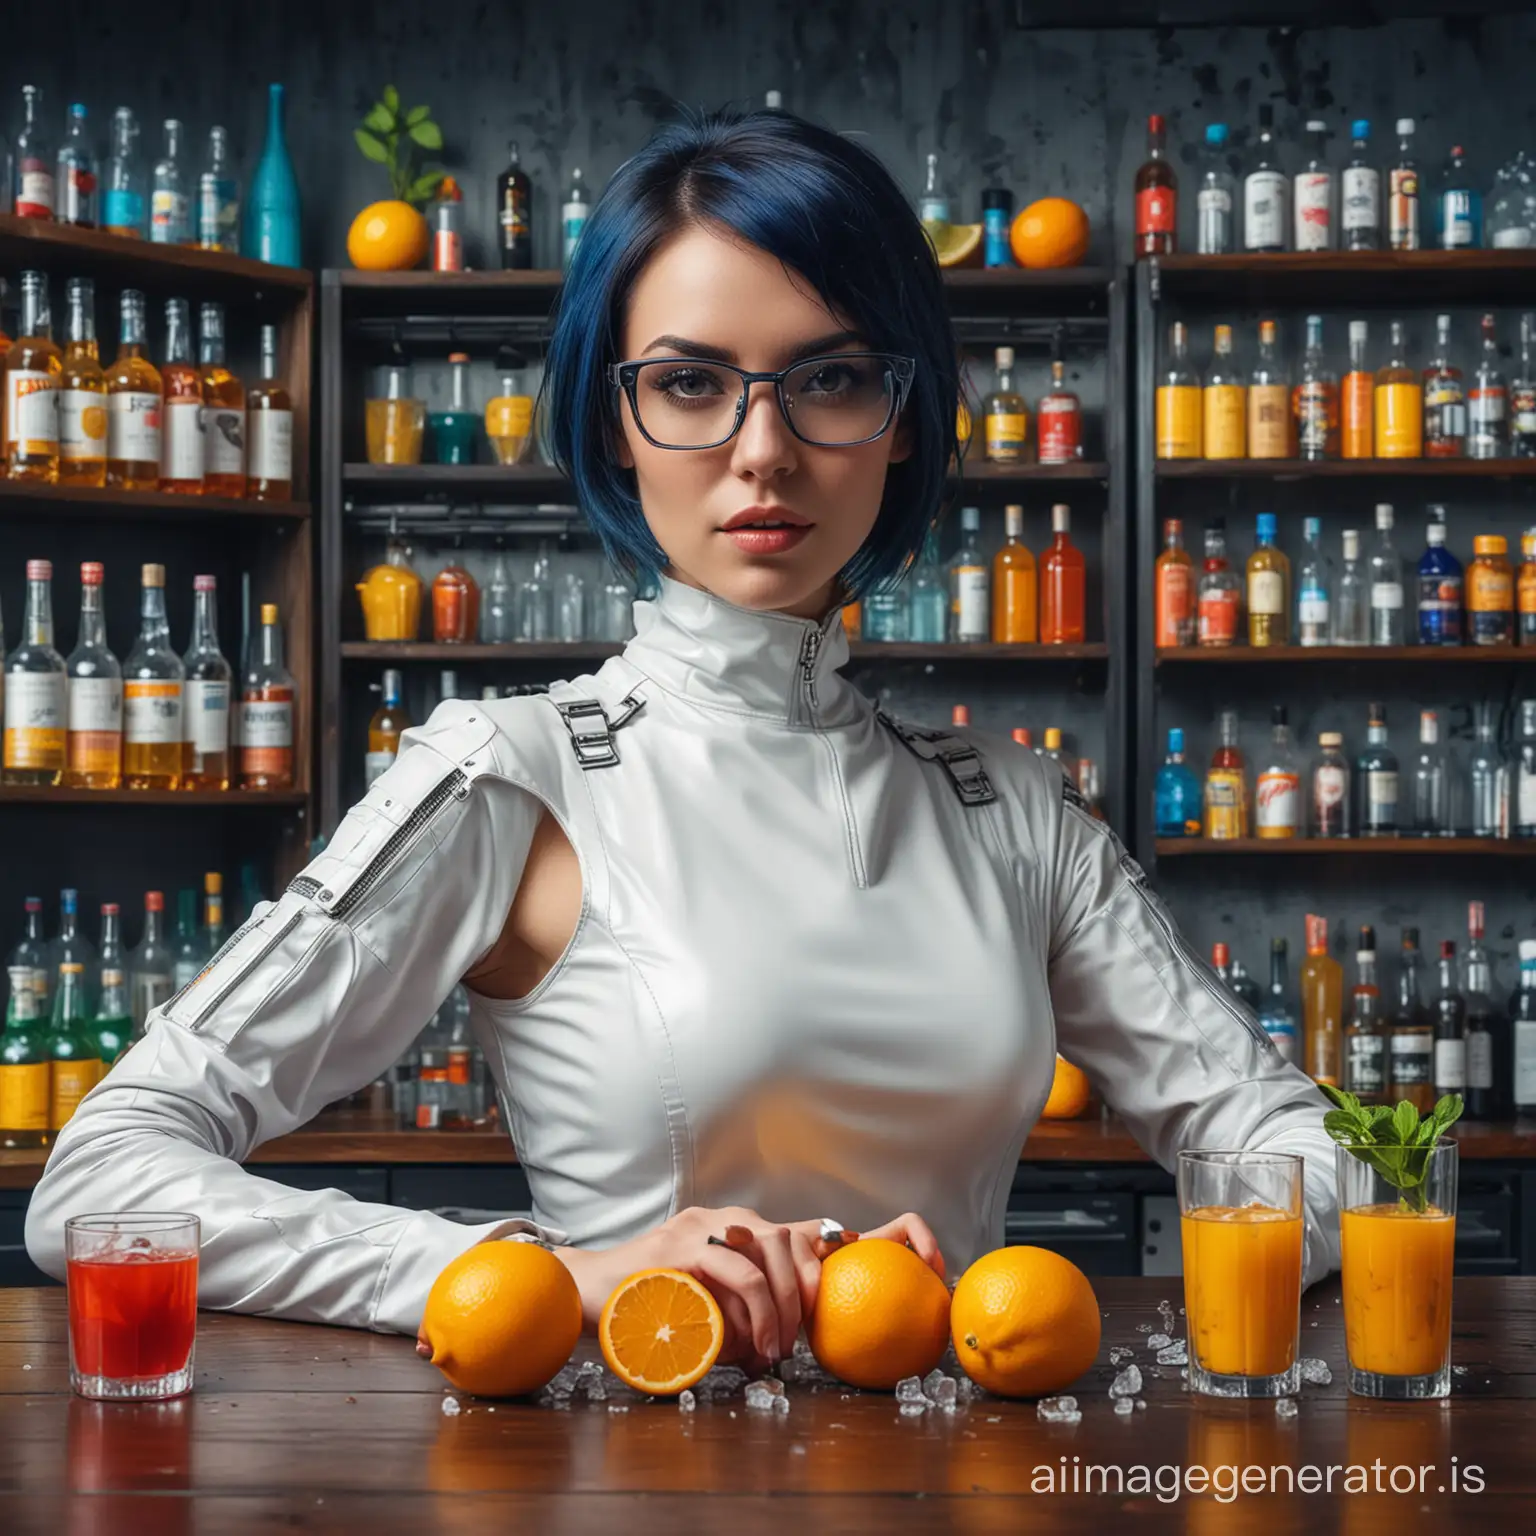 Cyber-Bar-Bartender-Squeezing-Citrus-for-Colorful-Cocktails